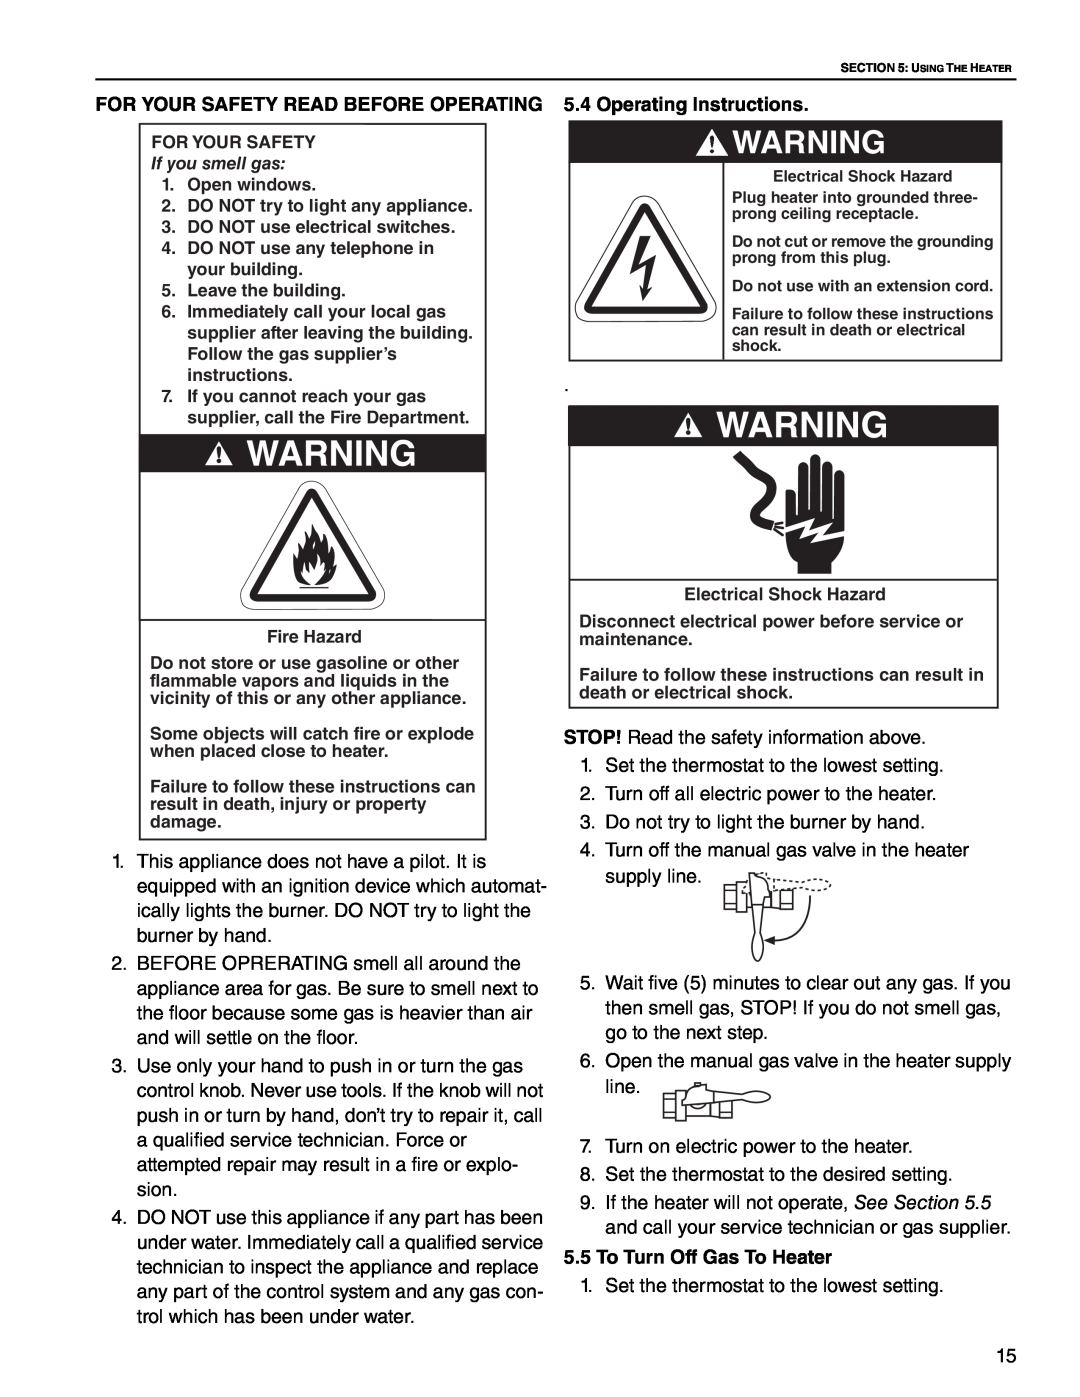 Roberts Gorden CGTH-30, CGTH-50, CGTH-40 service manual 5.5To Turn Off Gas To Heater 